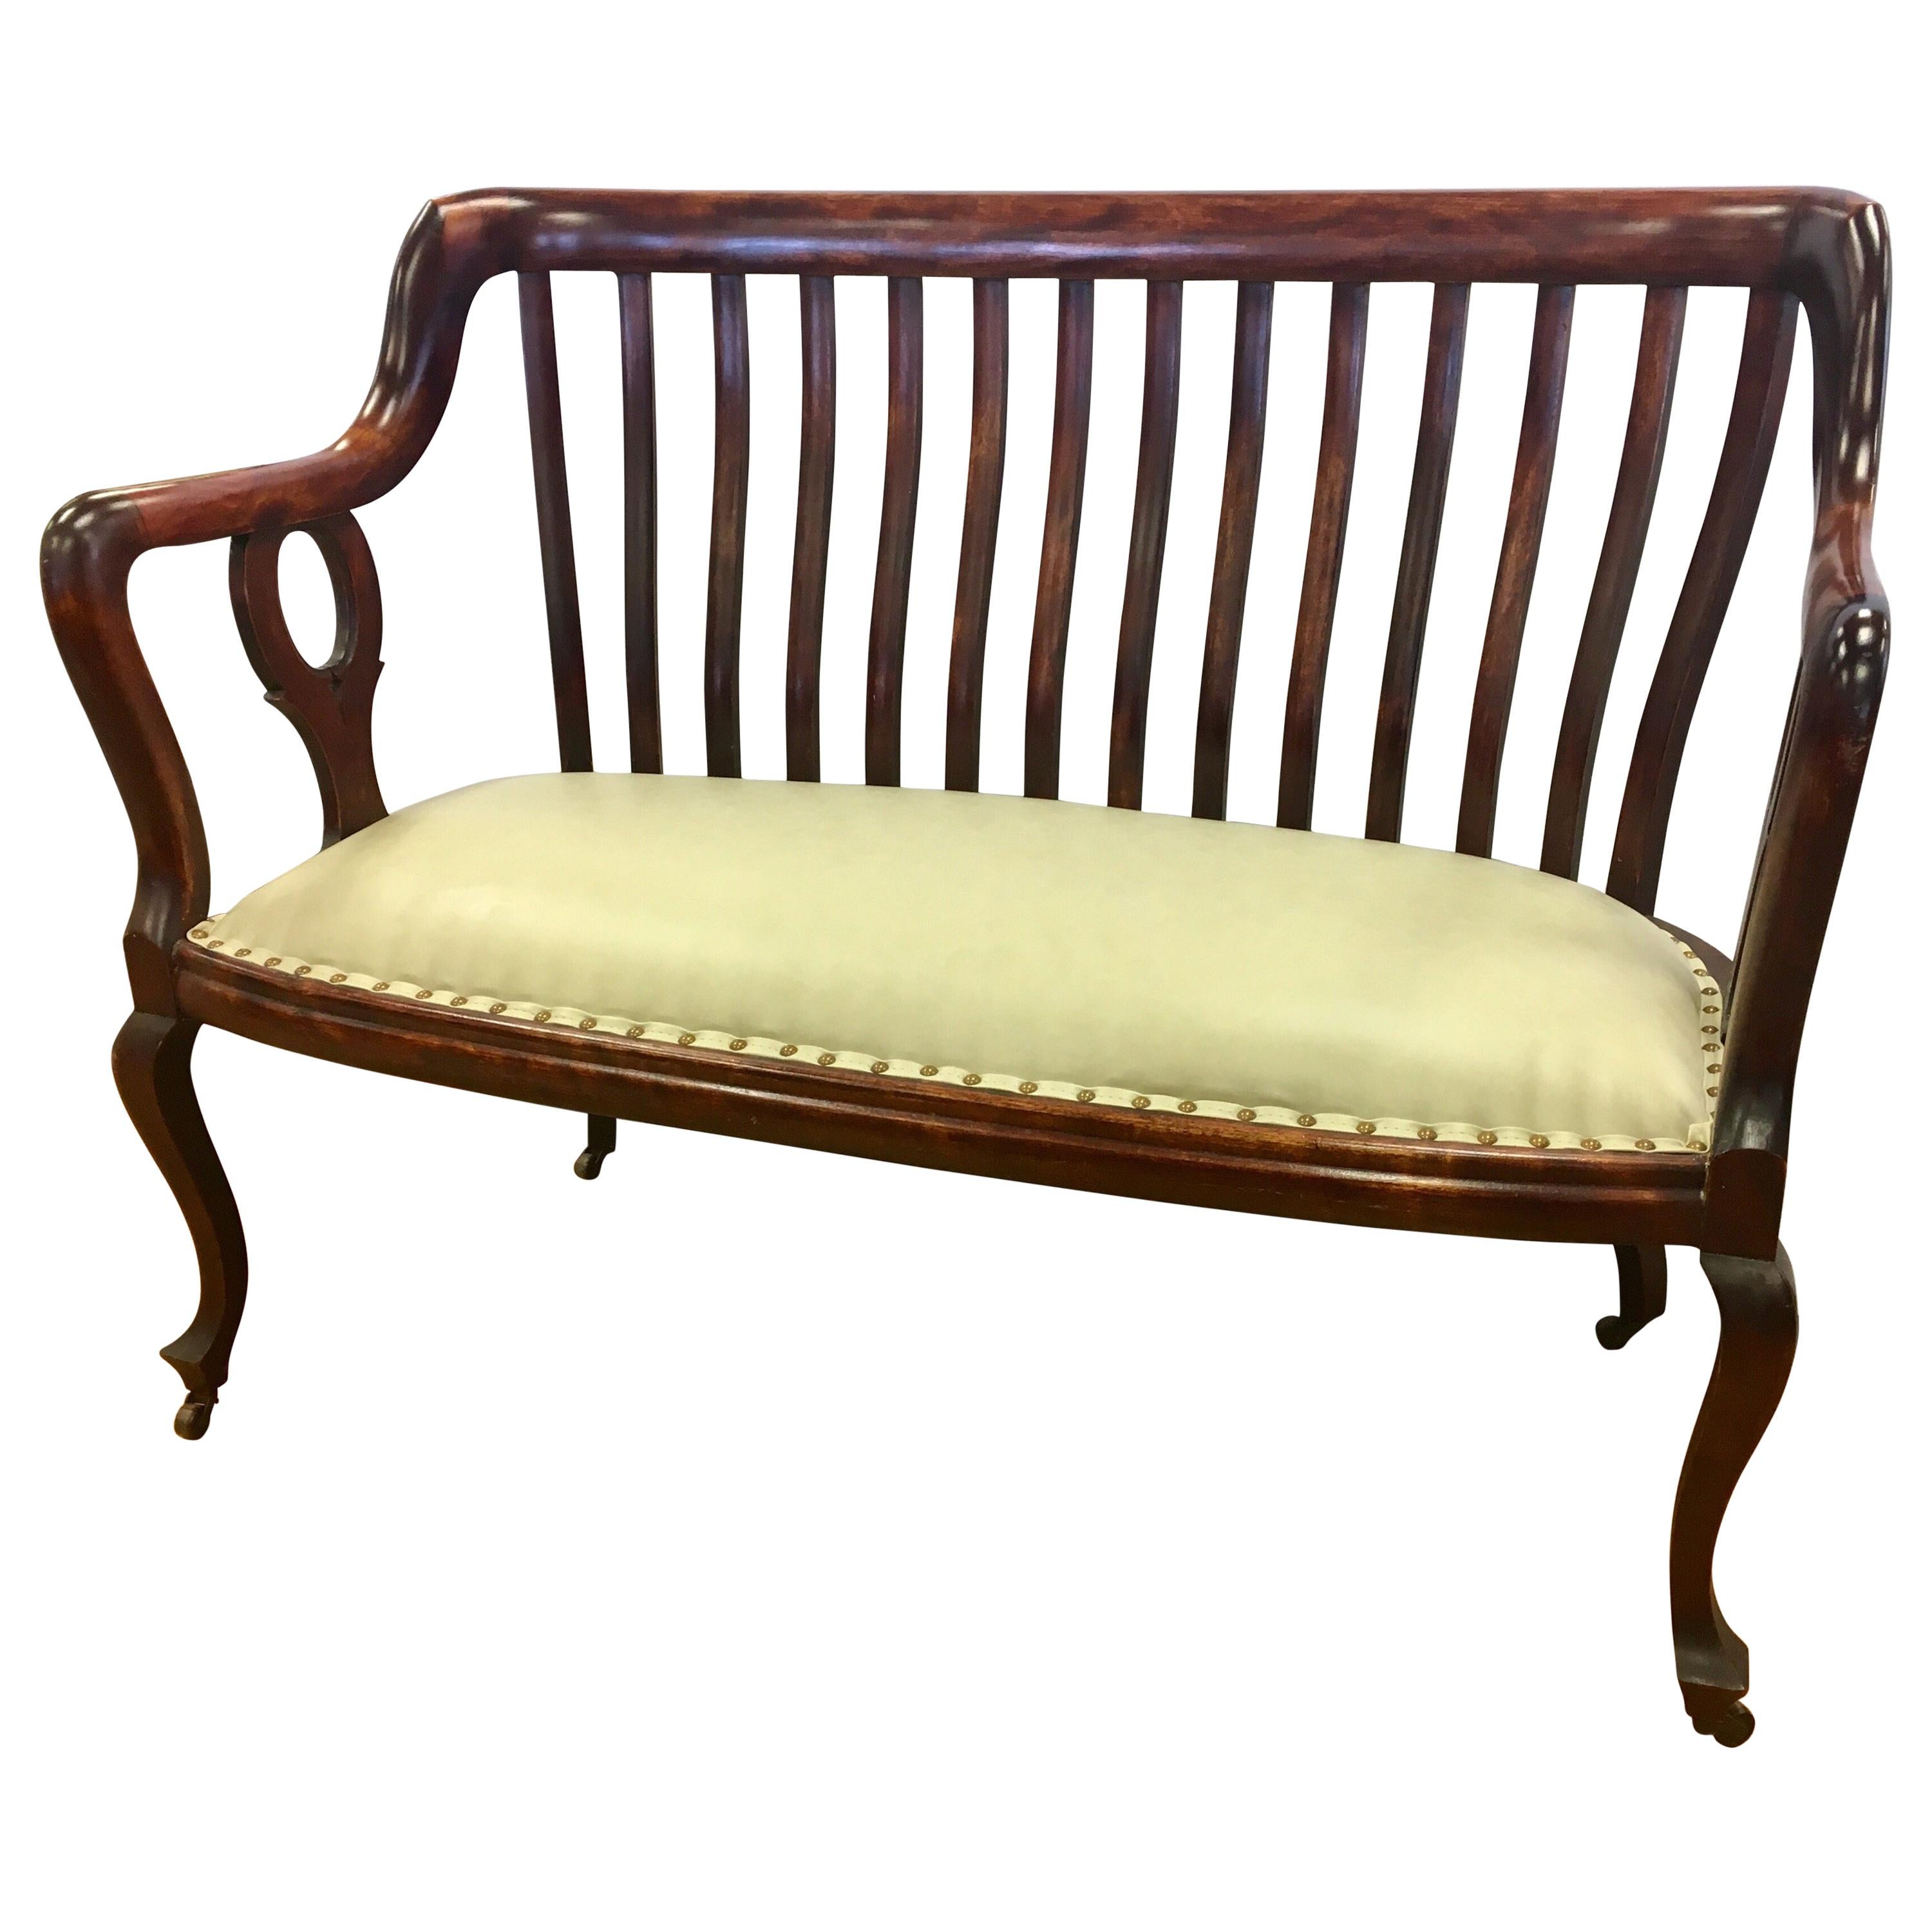 English Mahogany Settee Bench Fully Restored with New Upholstery Made in England